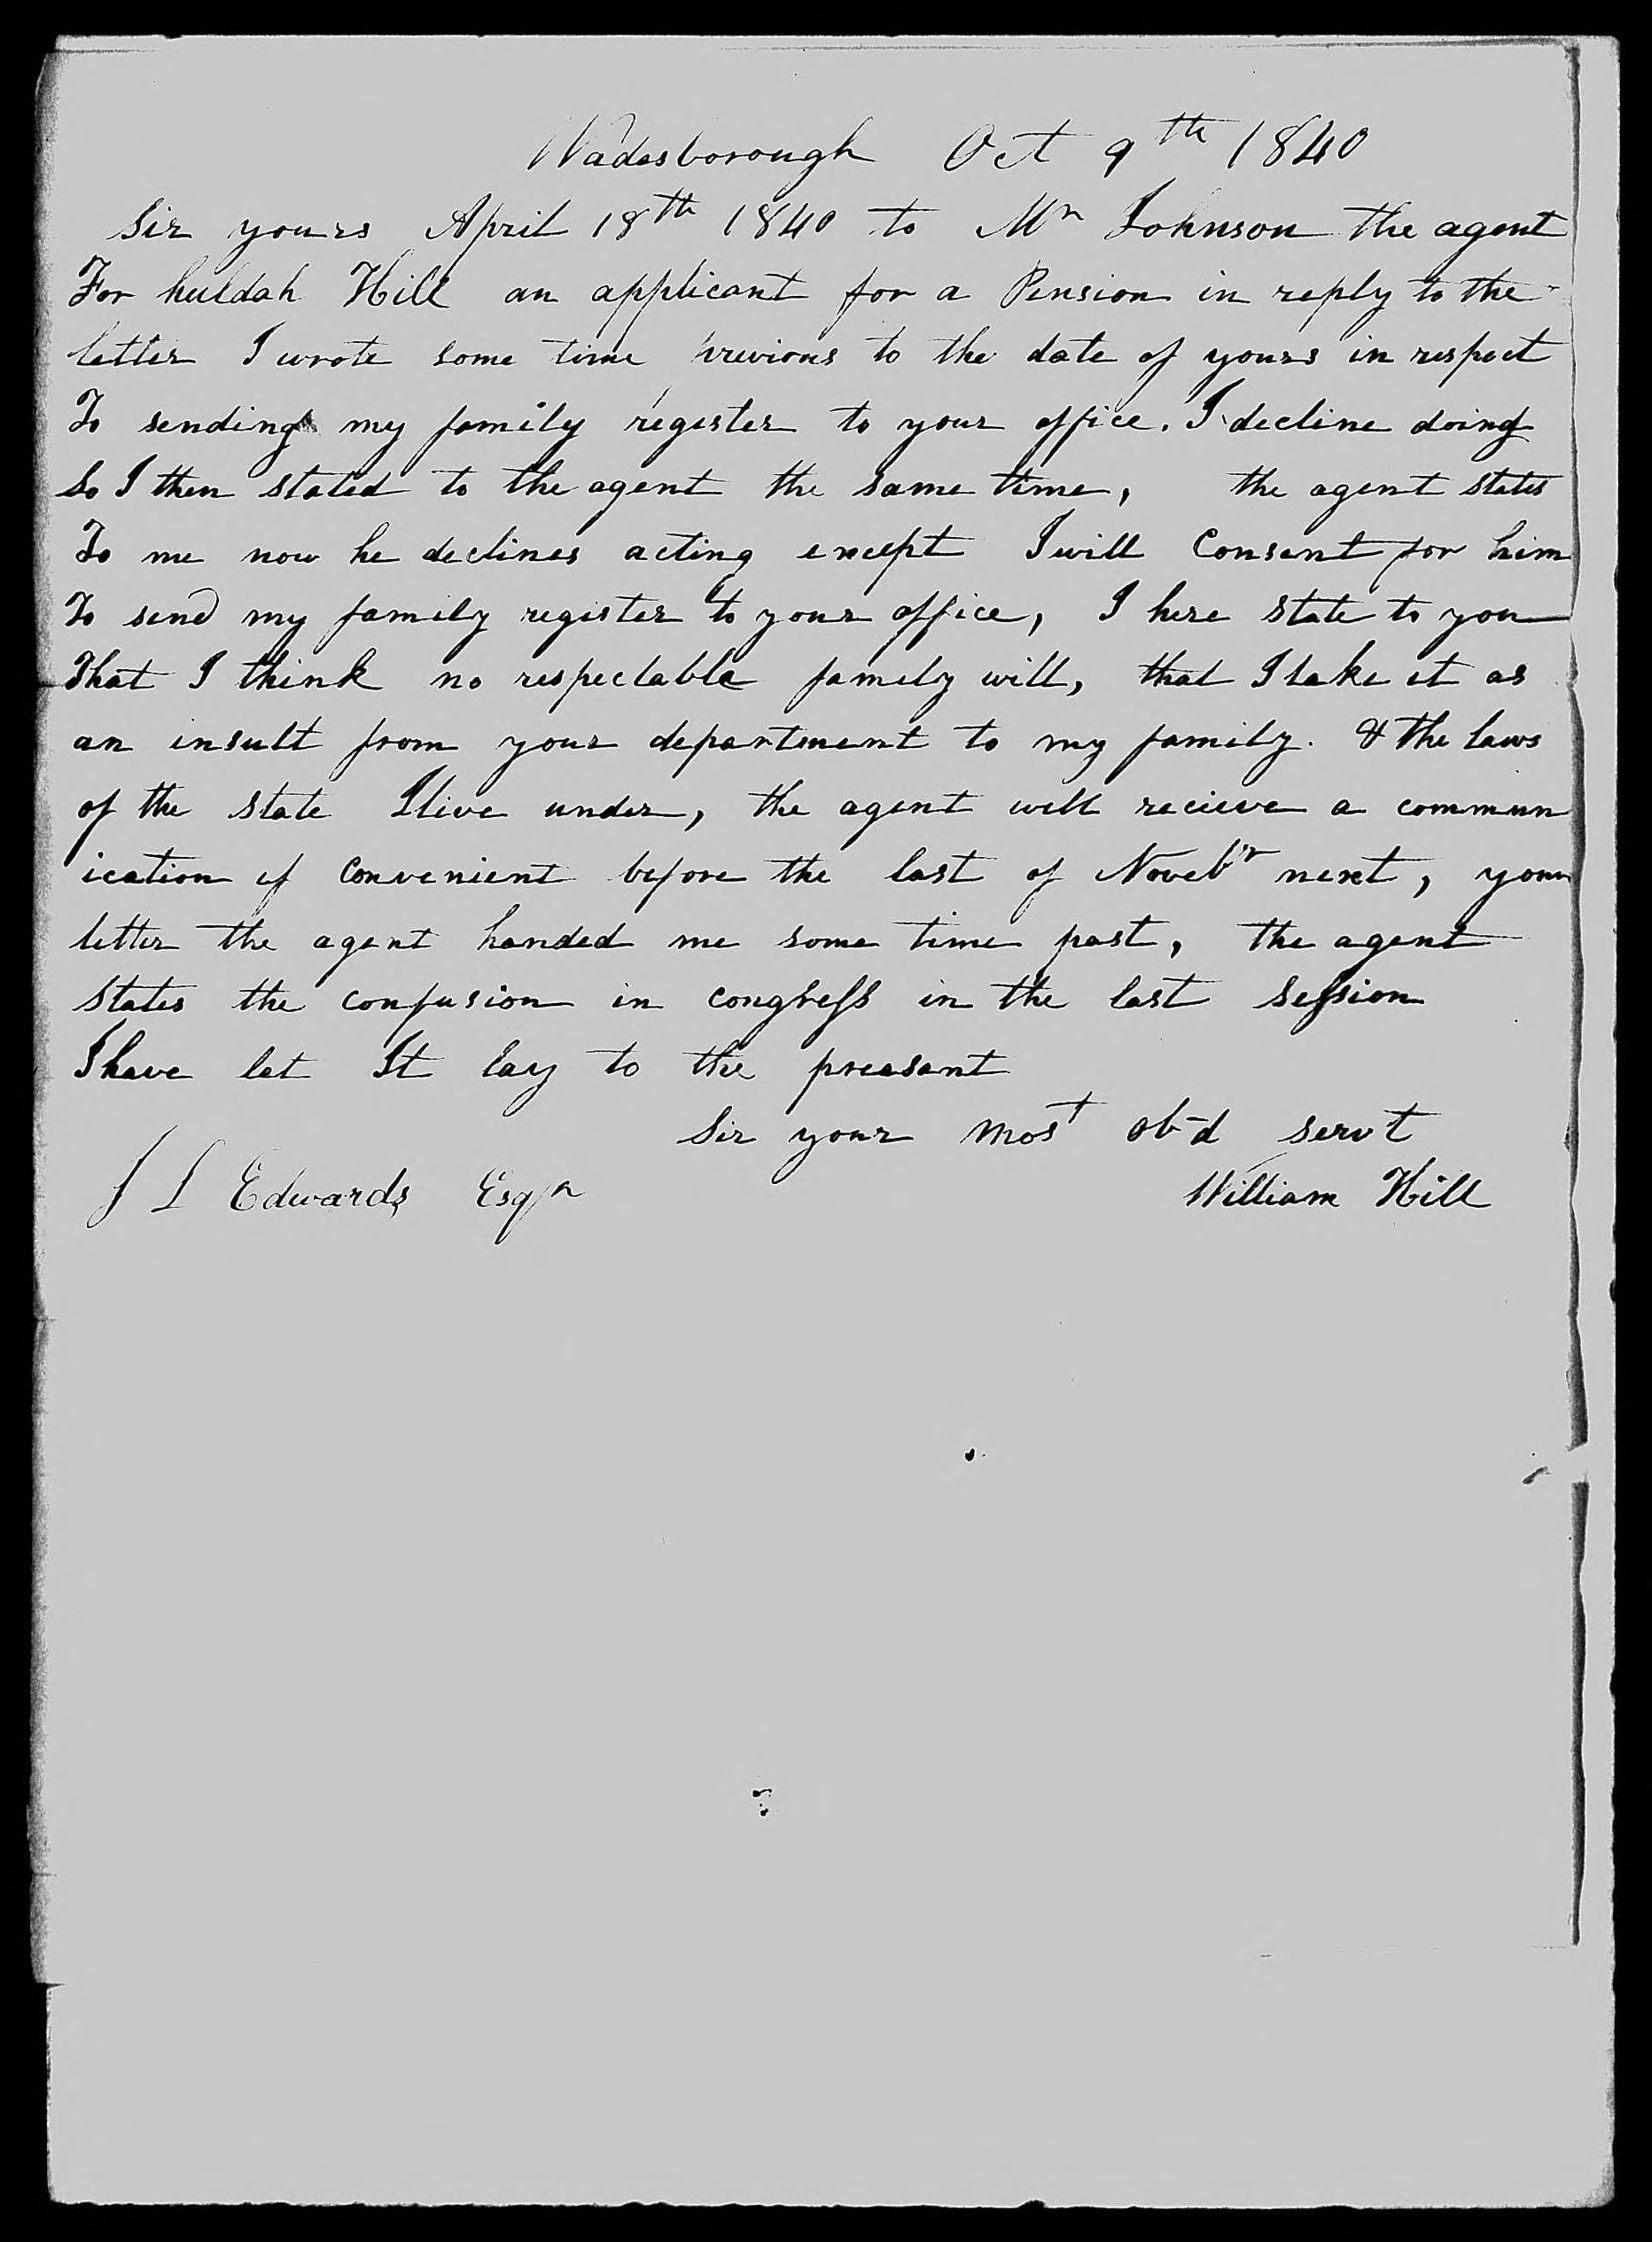 Letter from William Hill to James L. Edwards, 9 October 1840